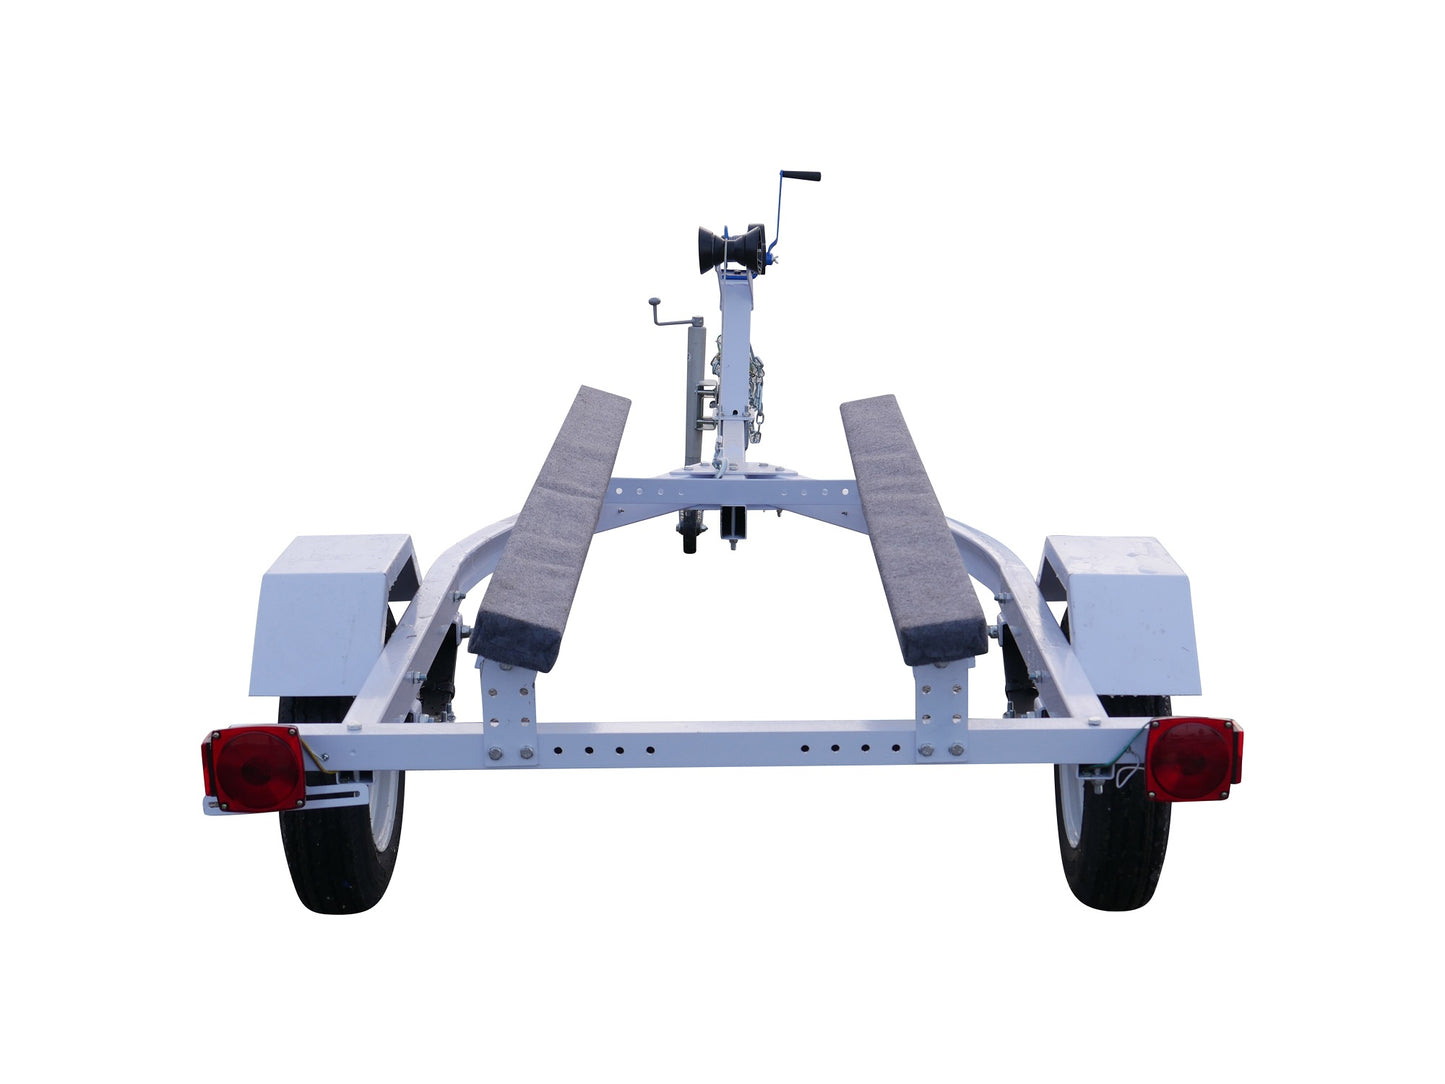 freedom fast fish deluxe boat trailer